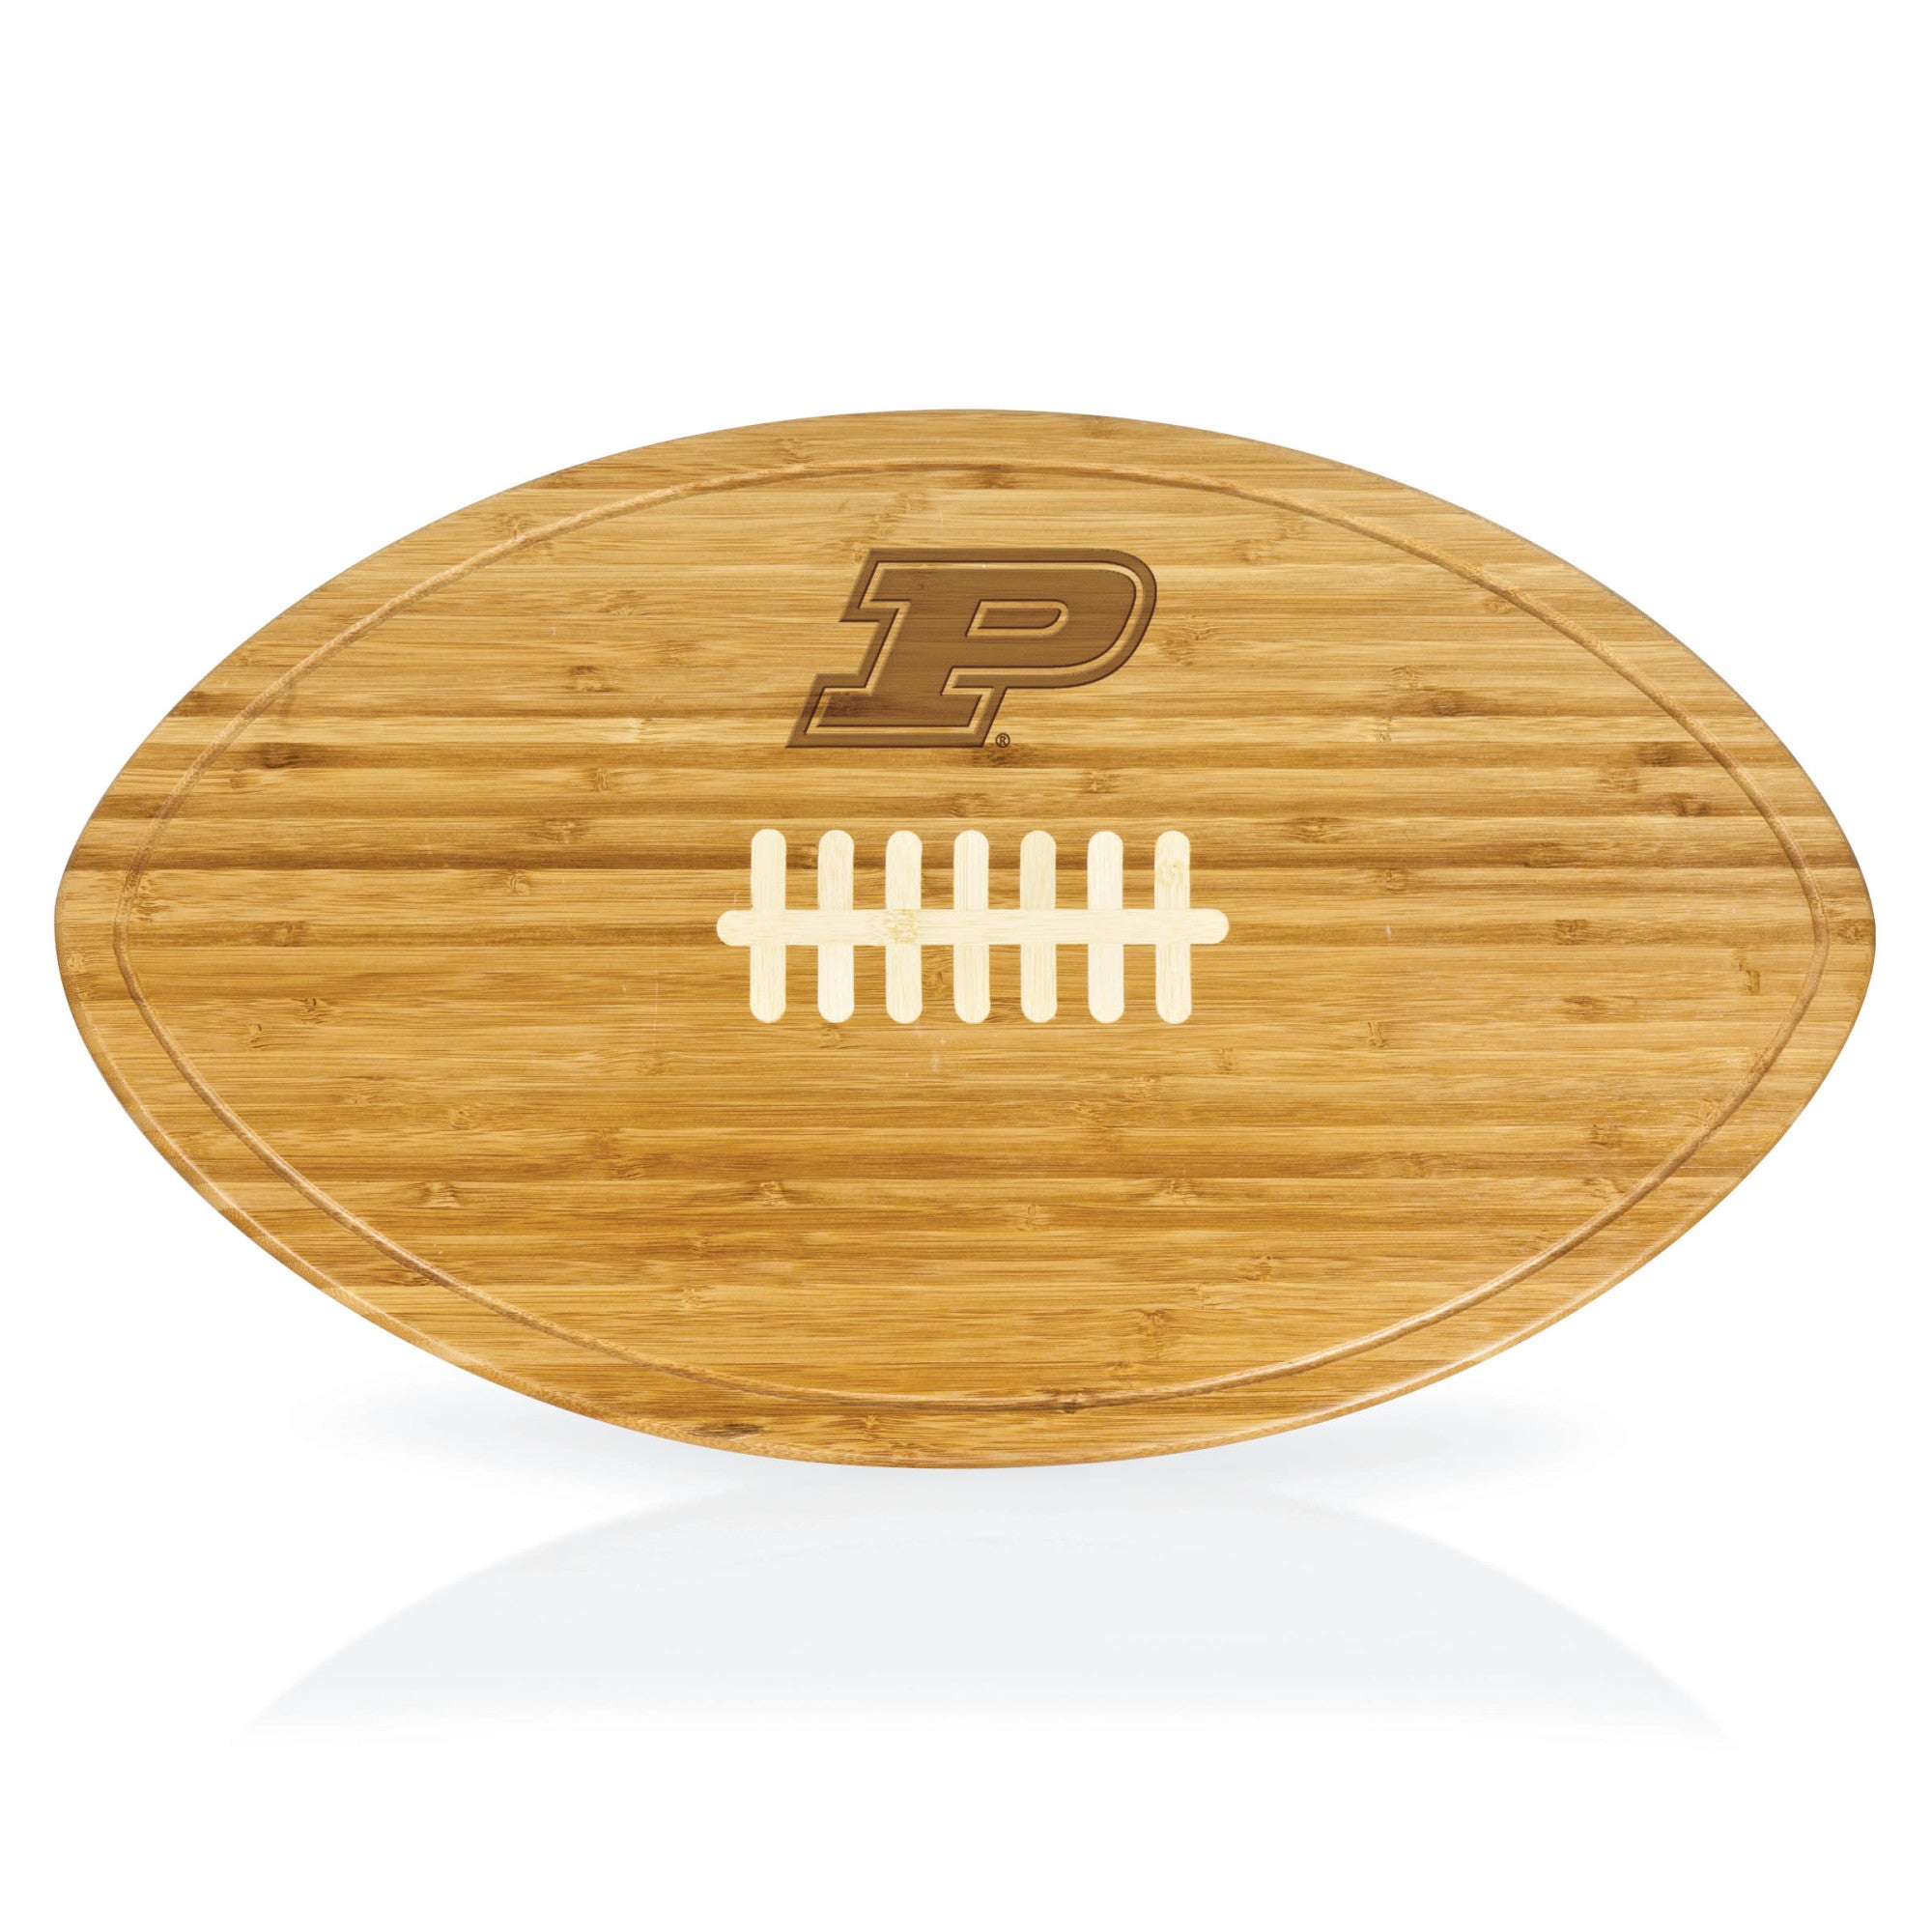 Purdue Boilermakers - Kickoff Football Cutting Board & Serving Tray, (Bamboo)